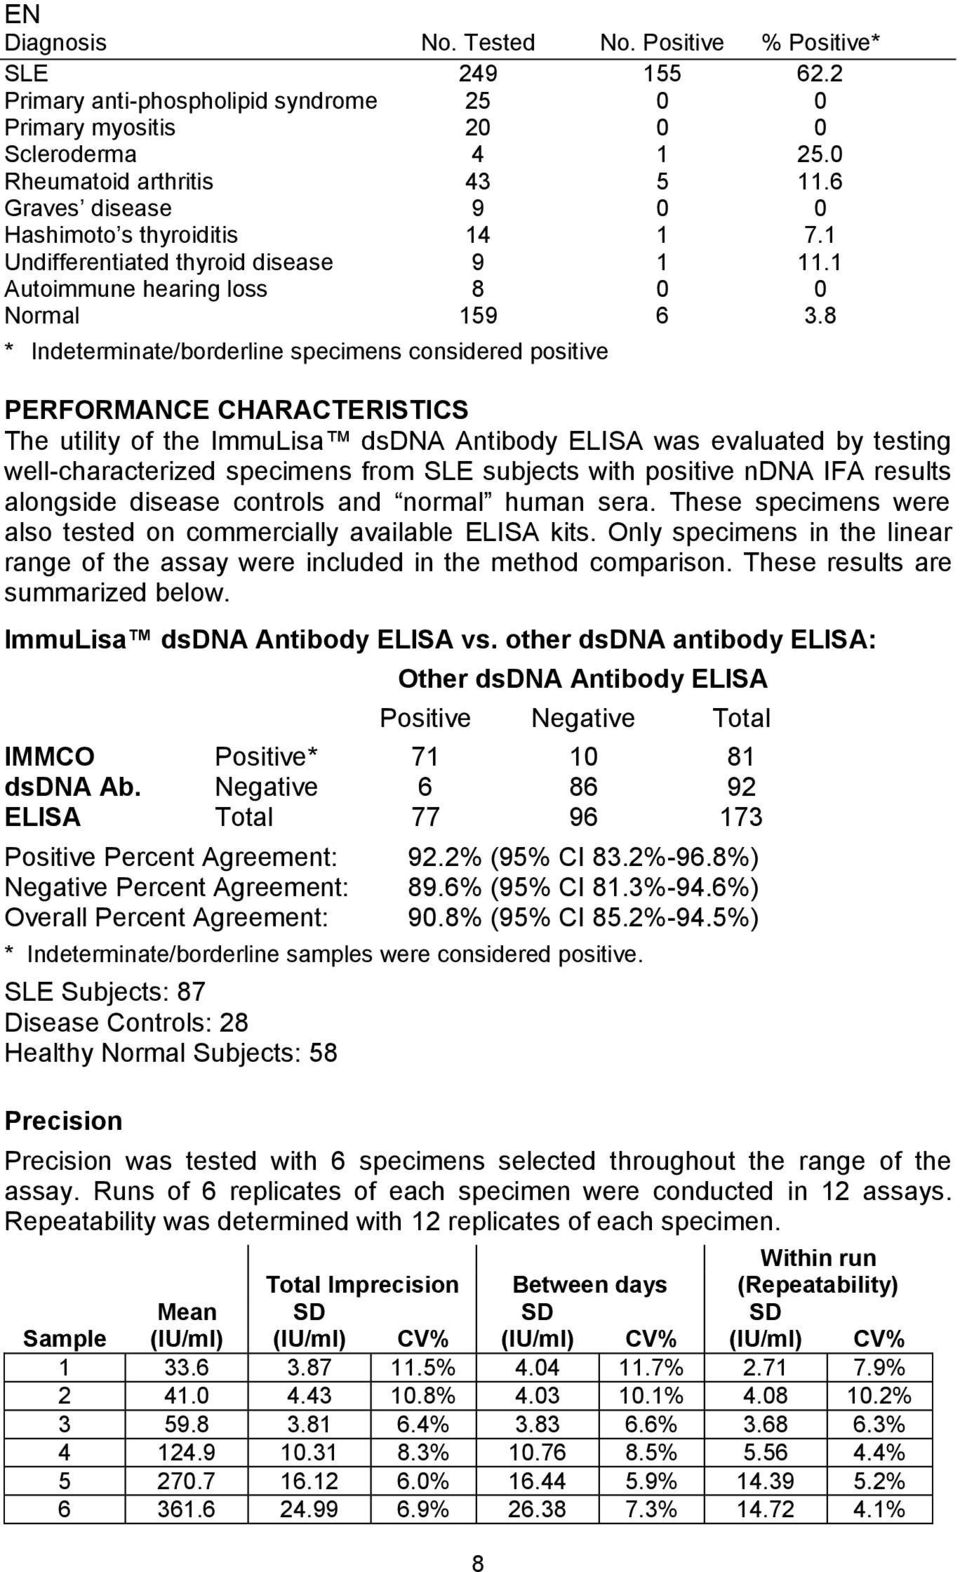 8 * Indeterminate/borderline specimens considered positive PERFORMANCE CHARACTERISTICS The utility of the ImmuLisa dsdna Antibody ELISA was evaluated by testing well-characterized specimens from SLE